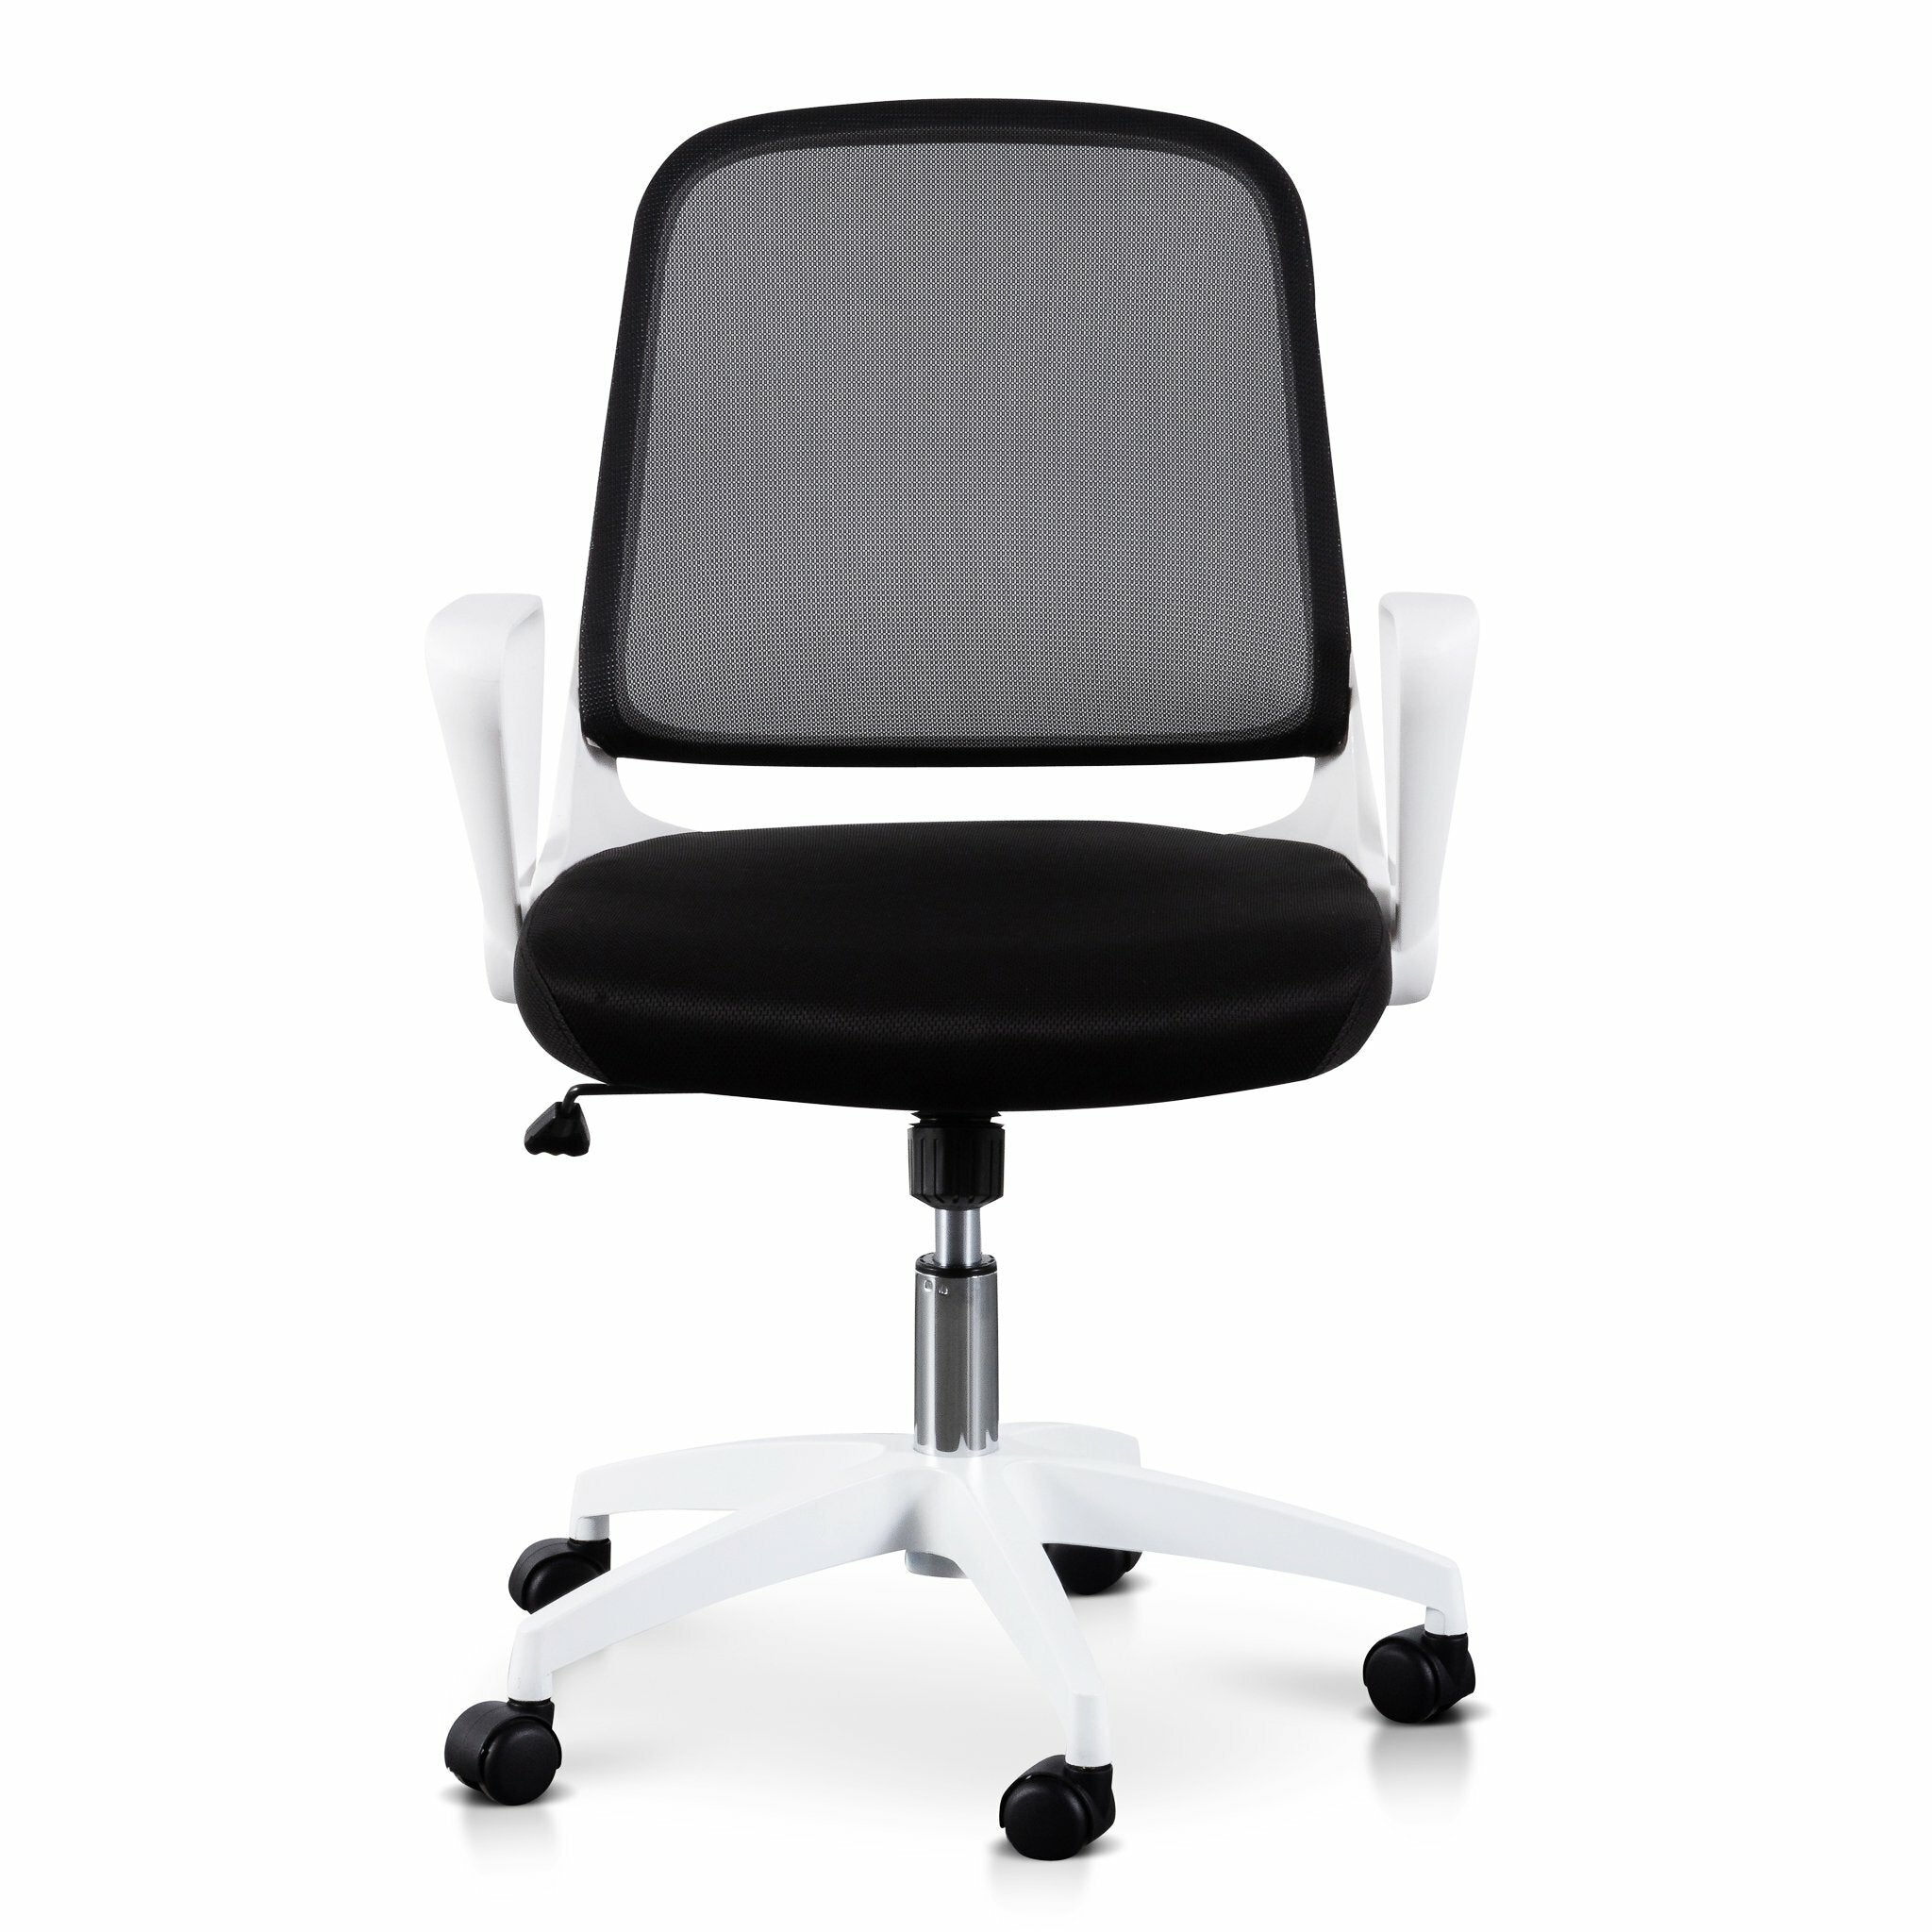 Heston Black Office Chair - White Arm and Base